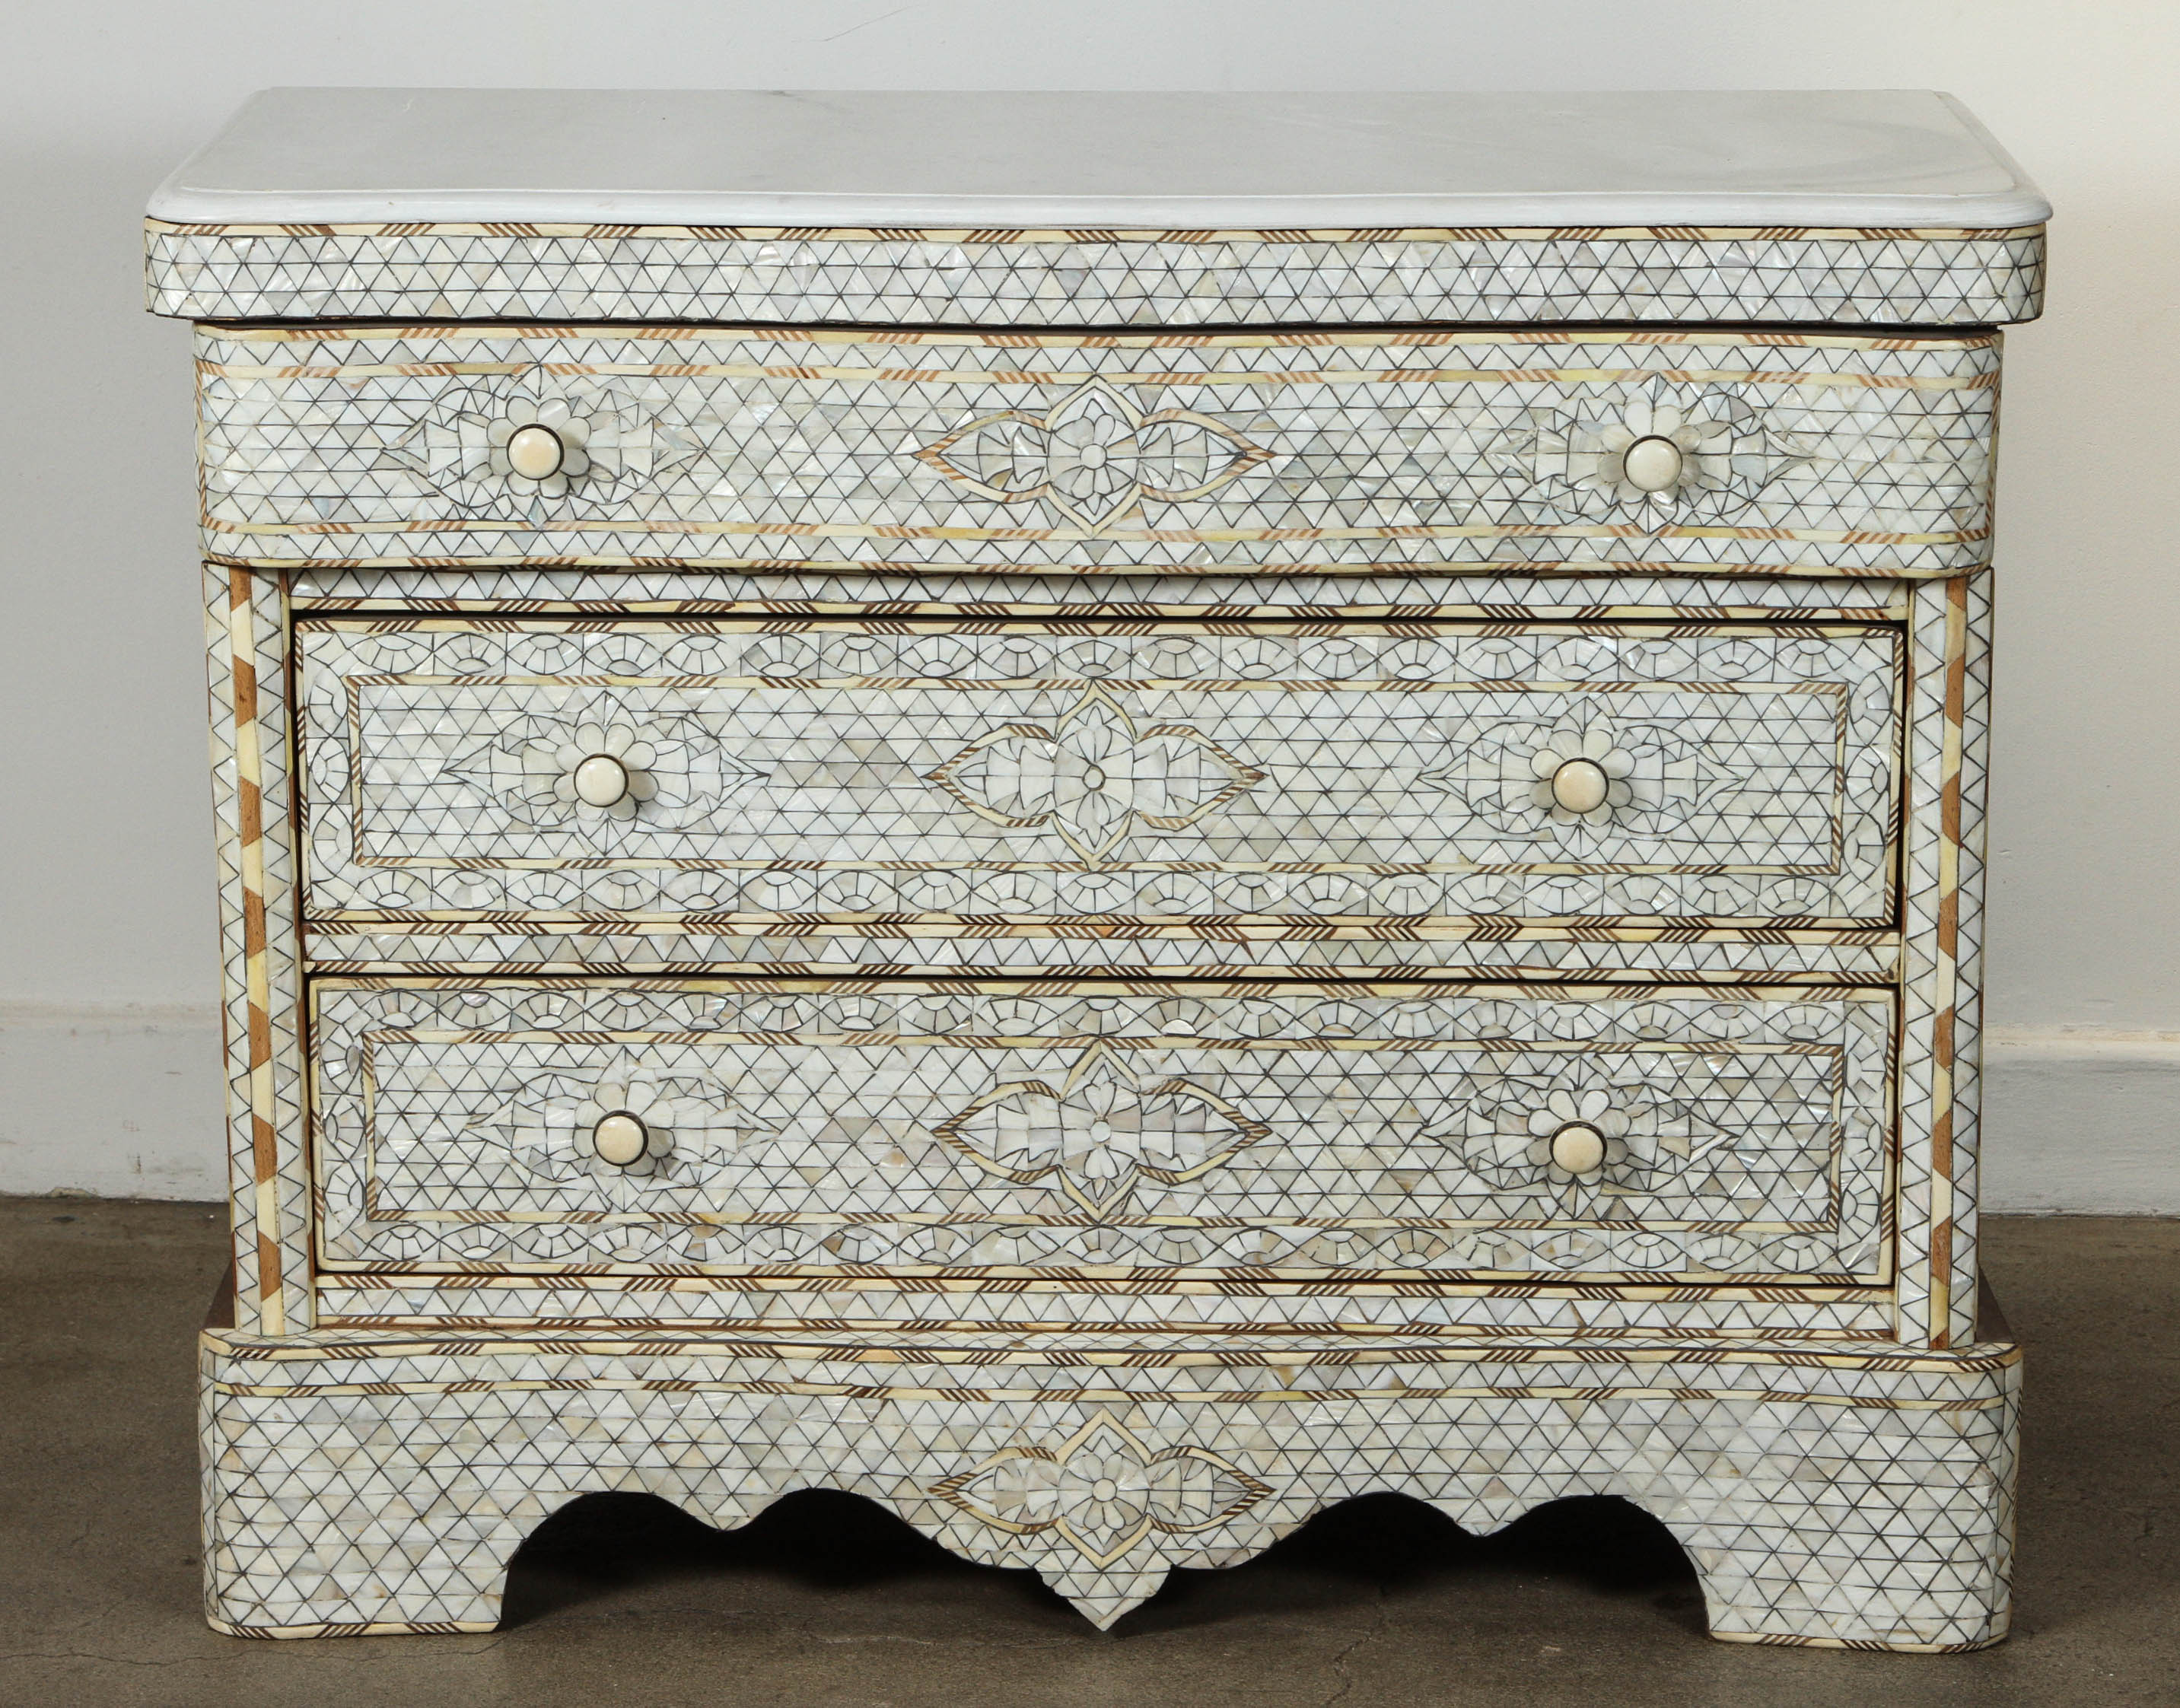 White Syrian Wedding Chest of Drawers Inlay